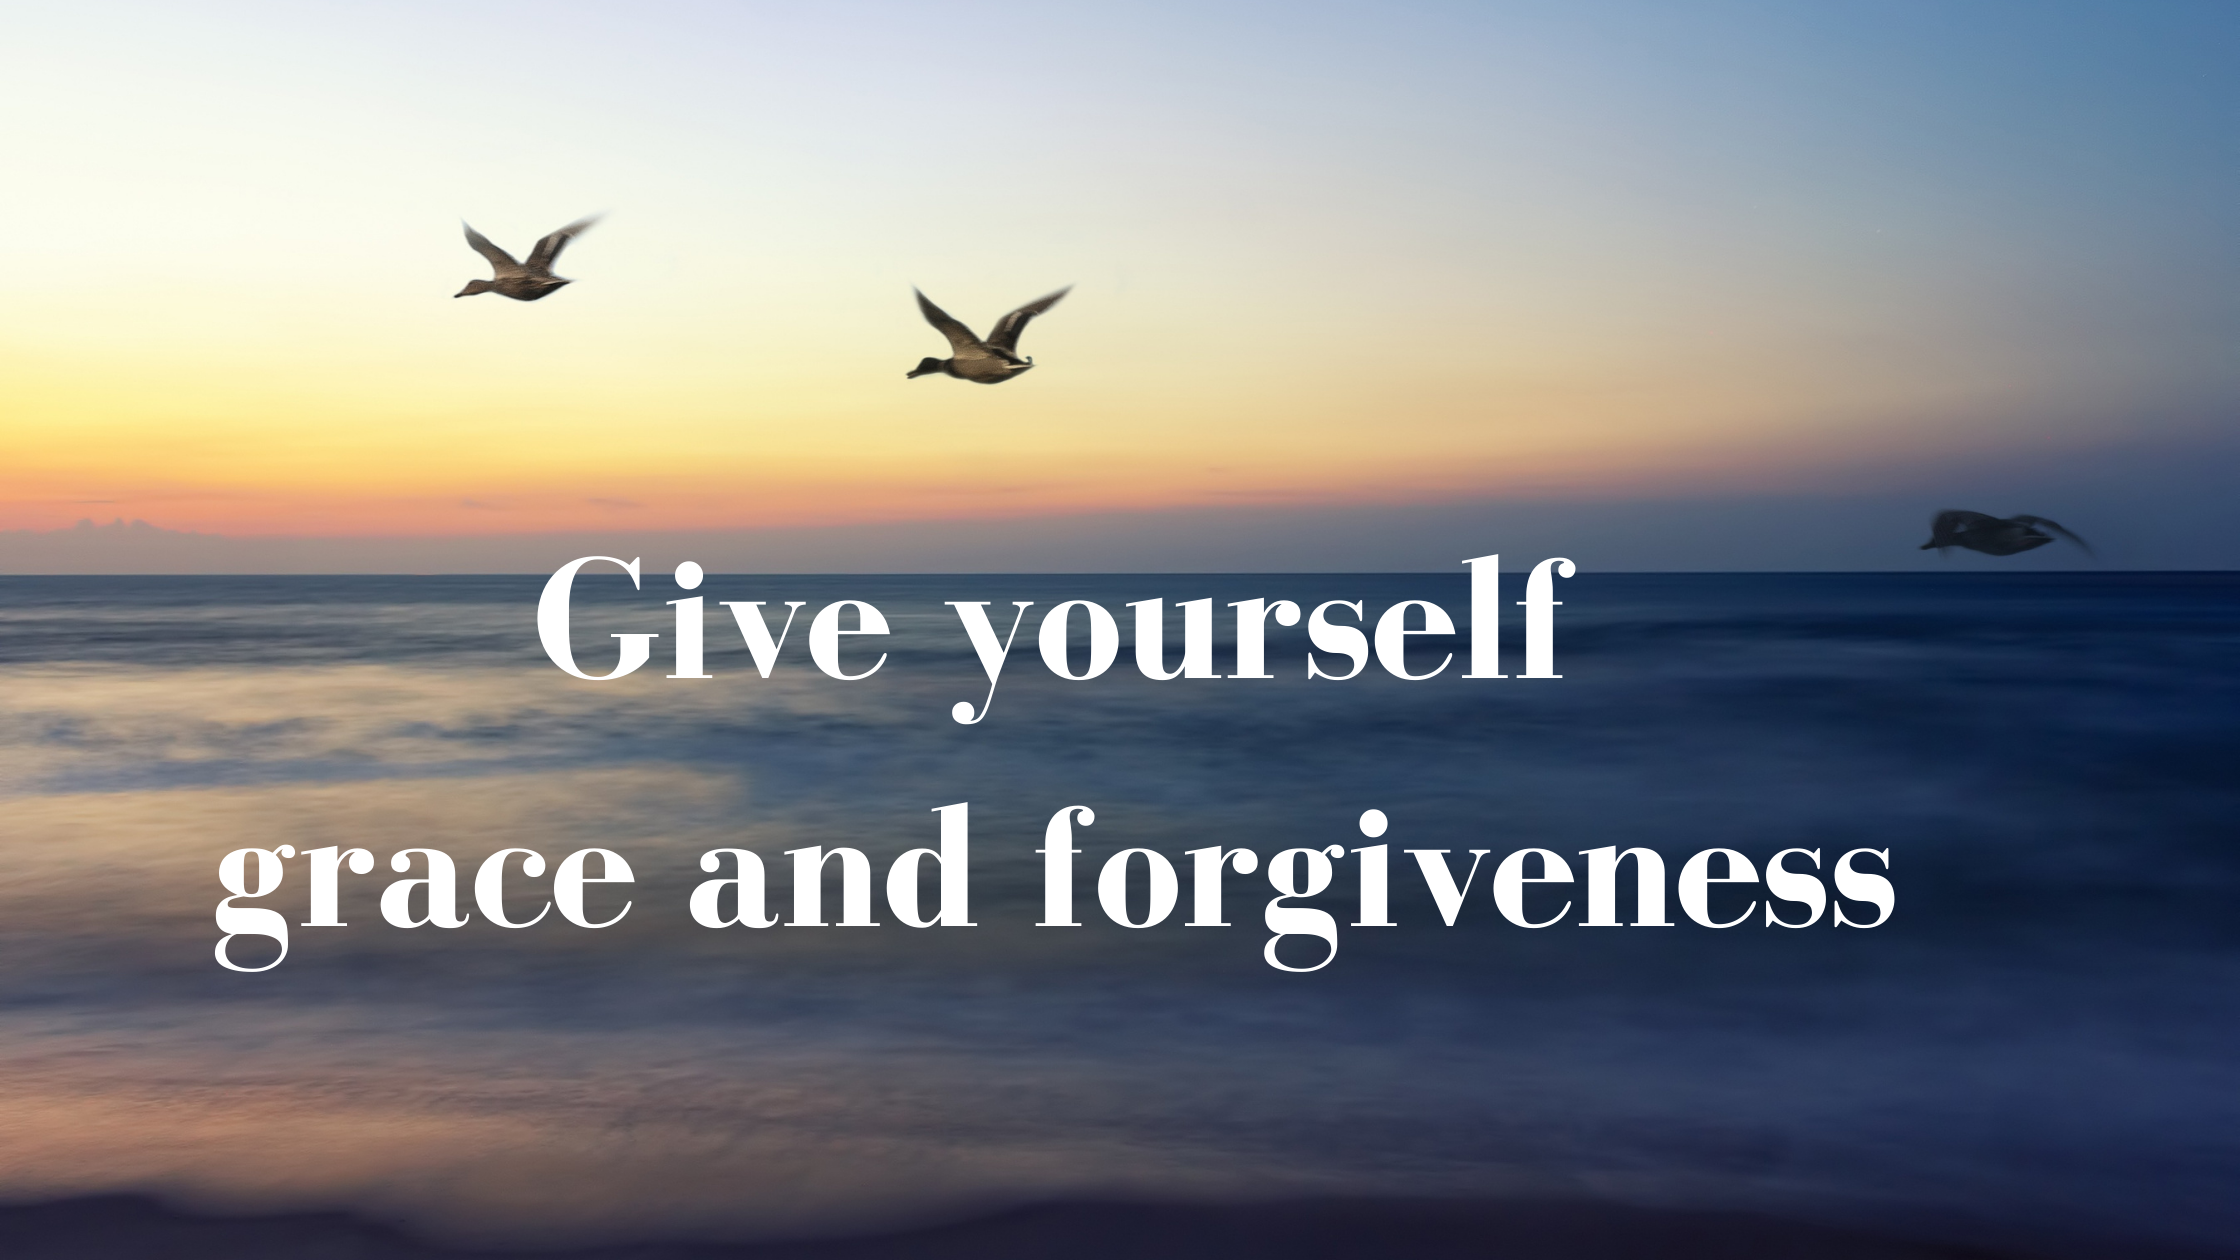 Give yourself grace and forgiveness